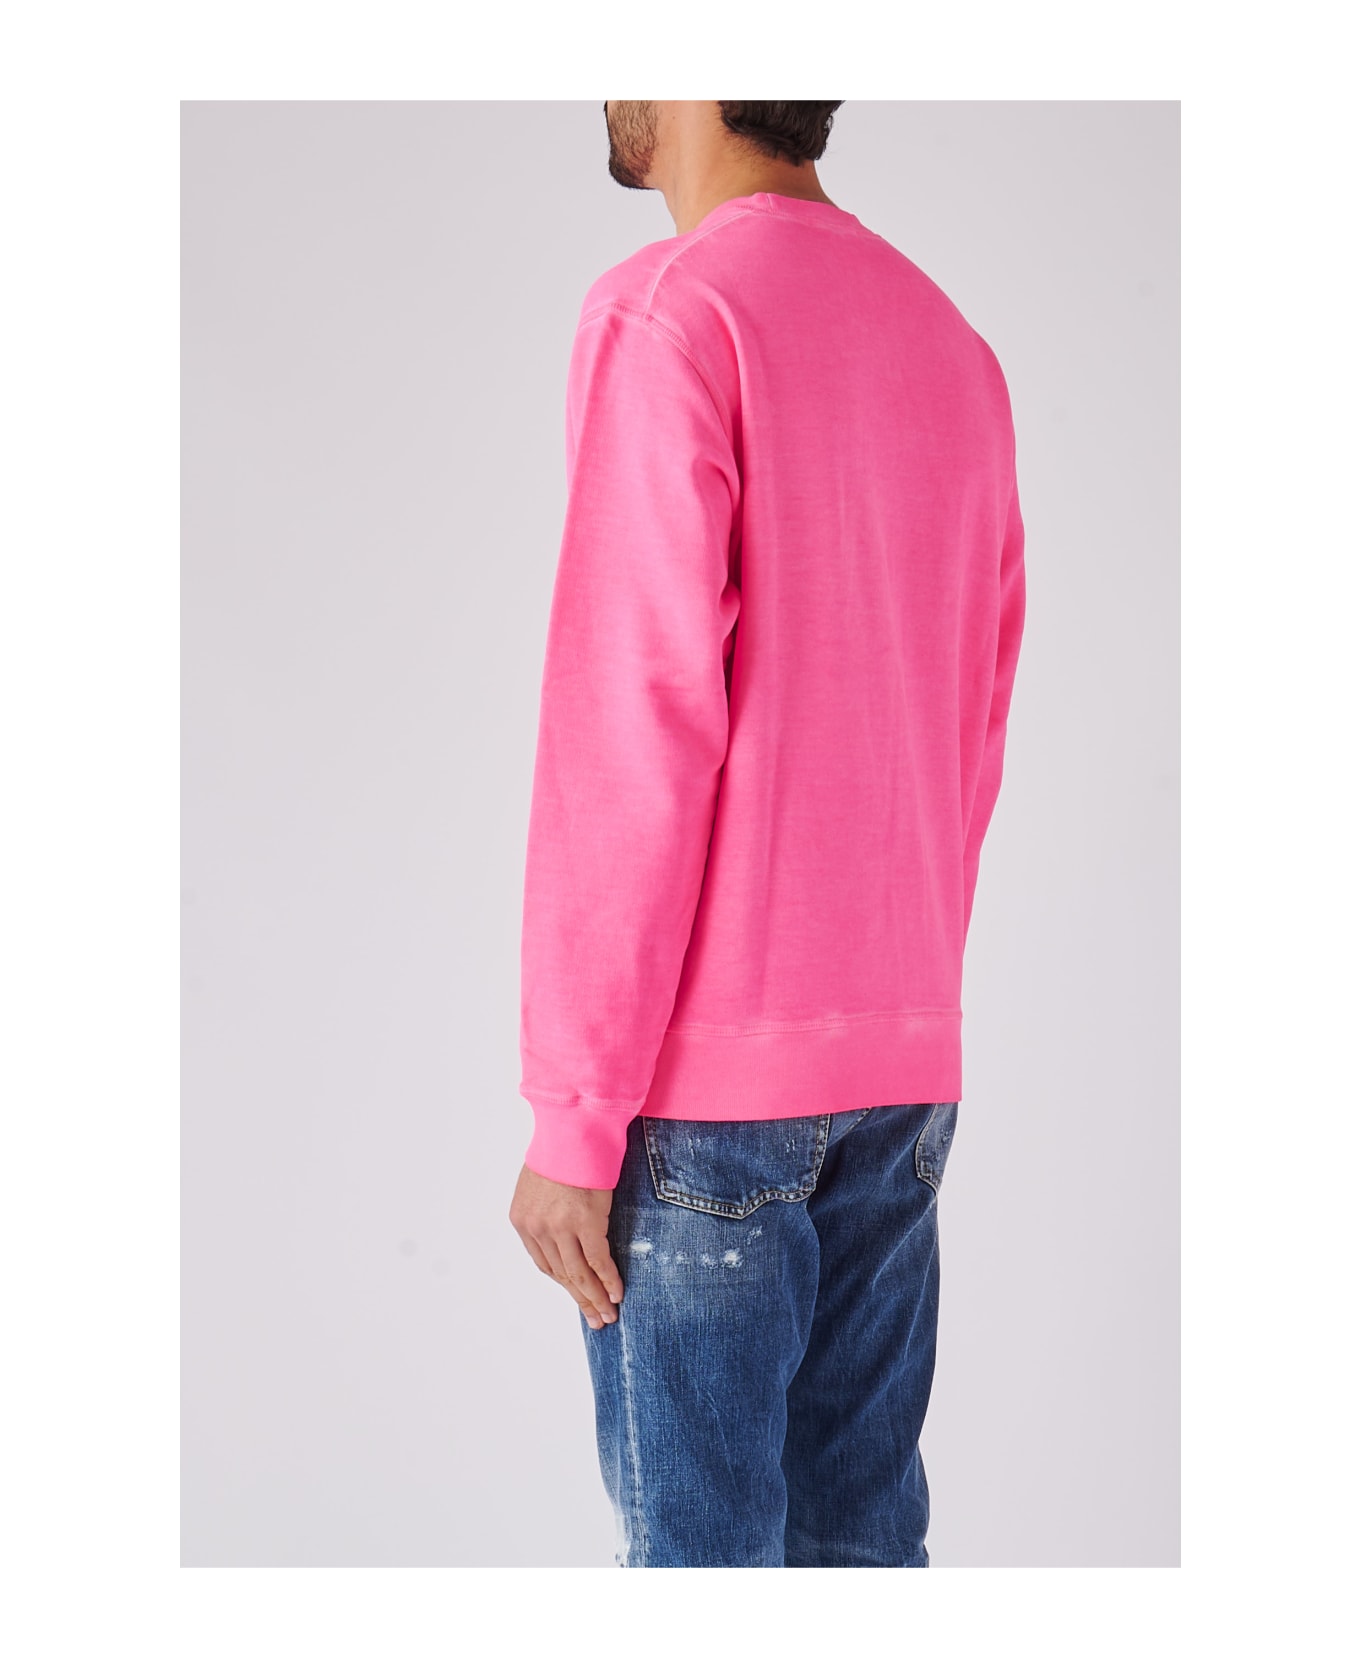 Dsquared2 Be Icon Cool Fit Tee Crewneck Sweatshirt - ROSA FLUO